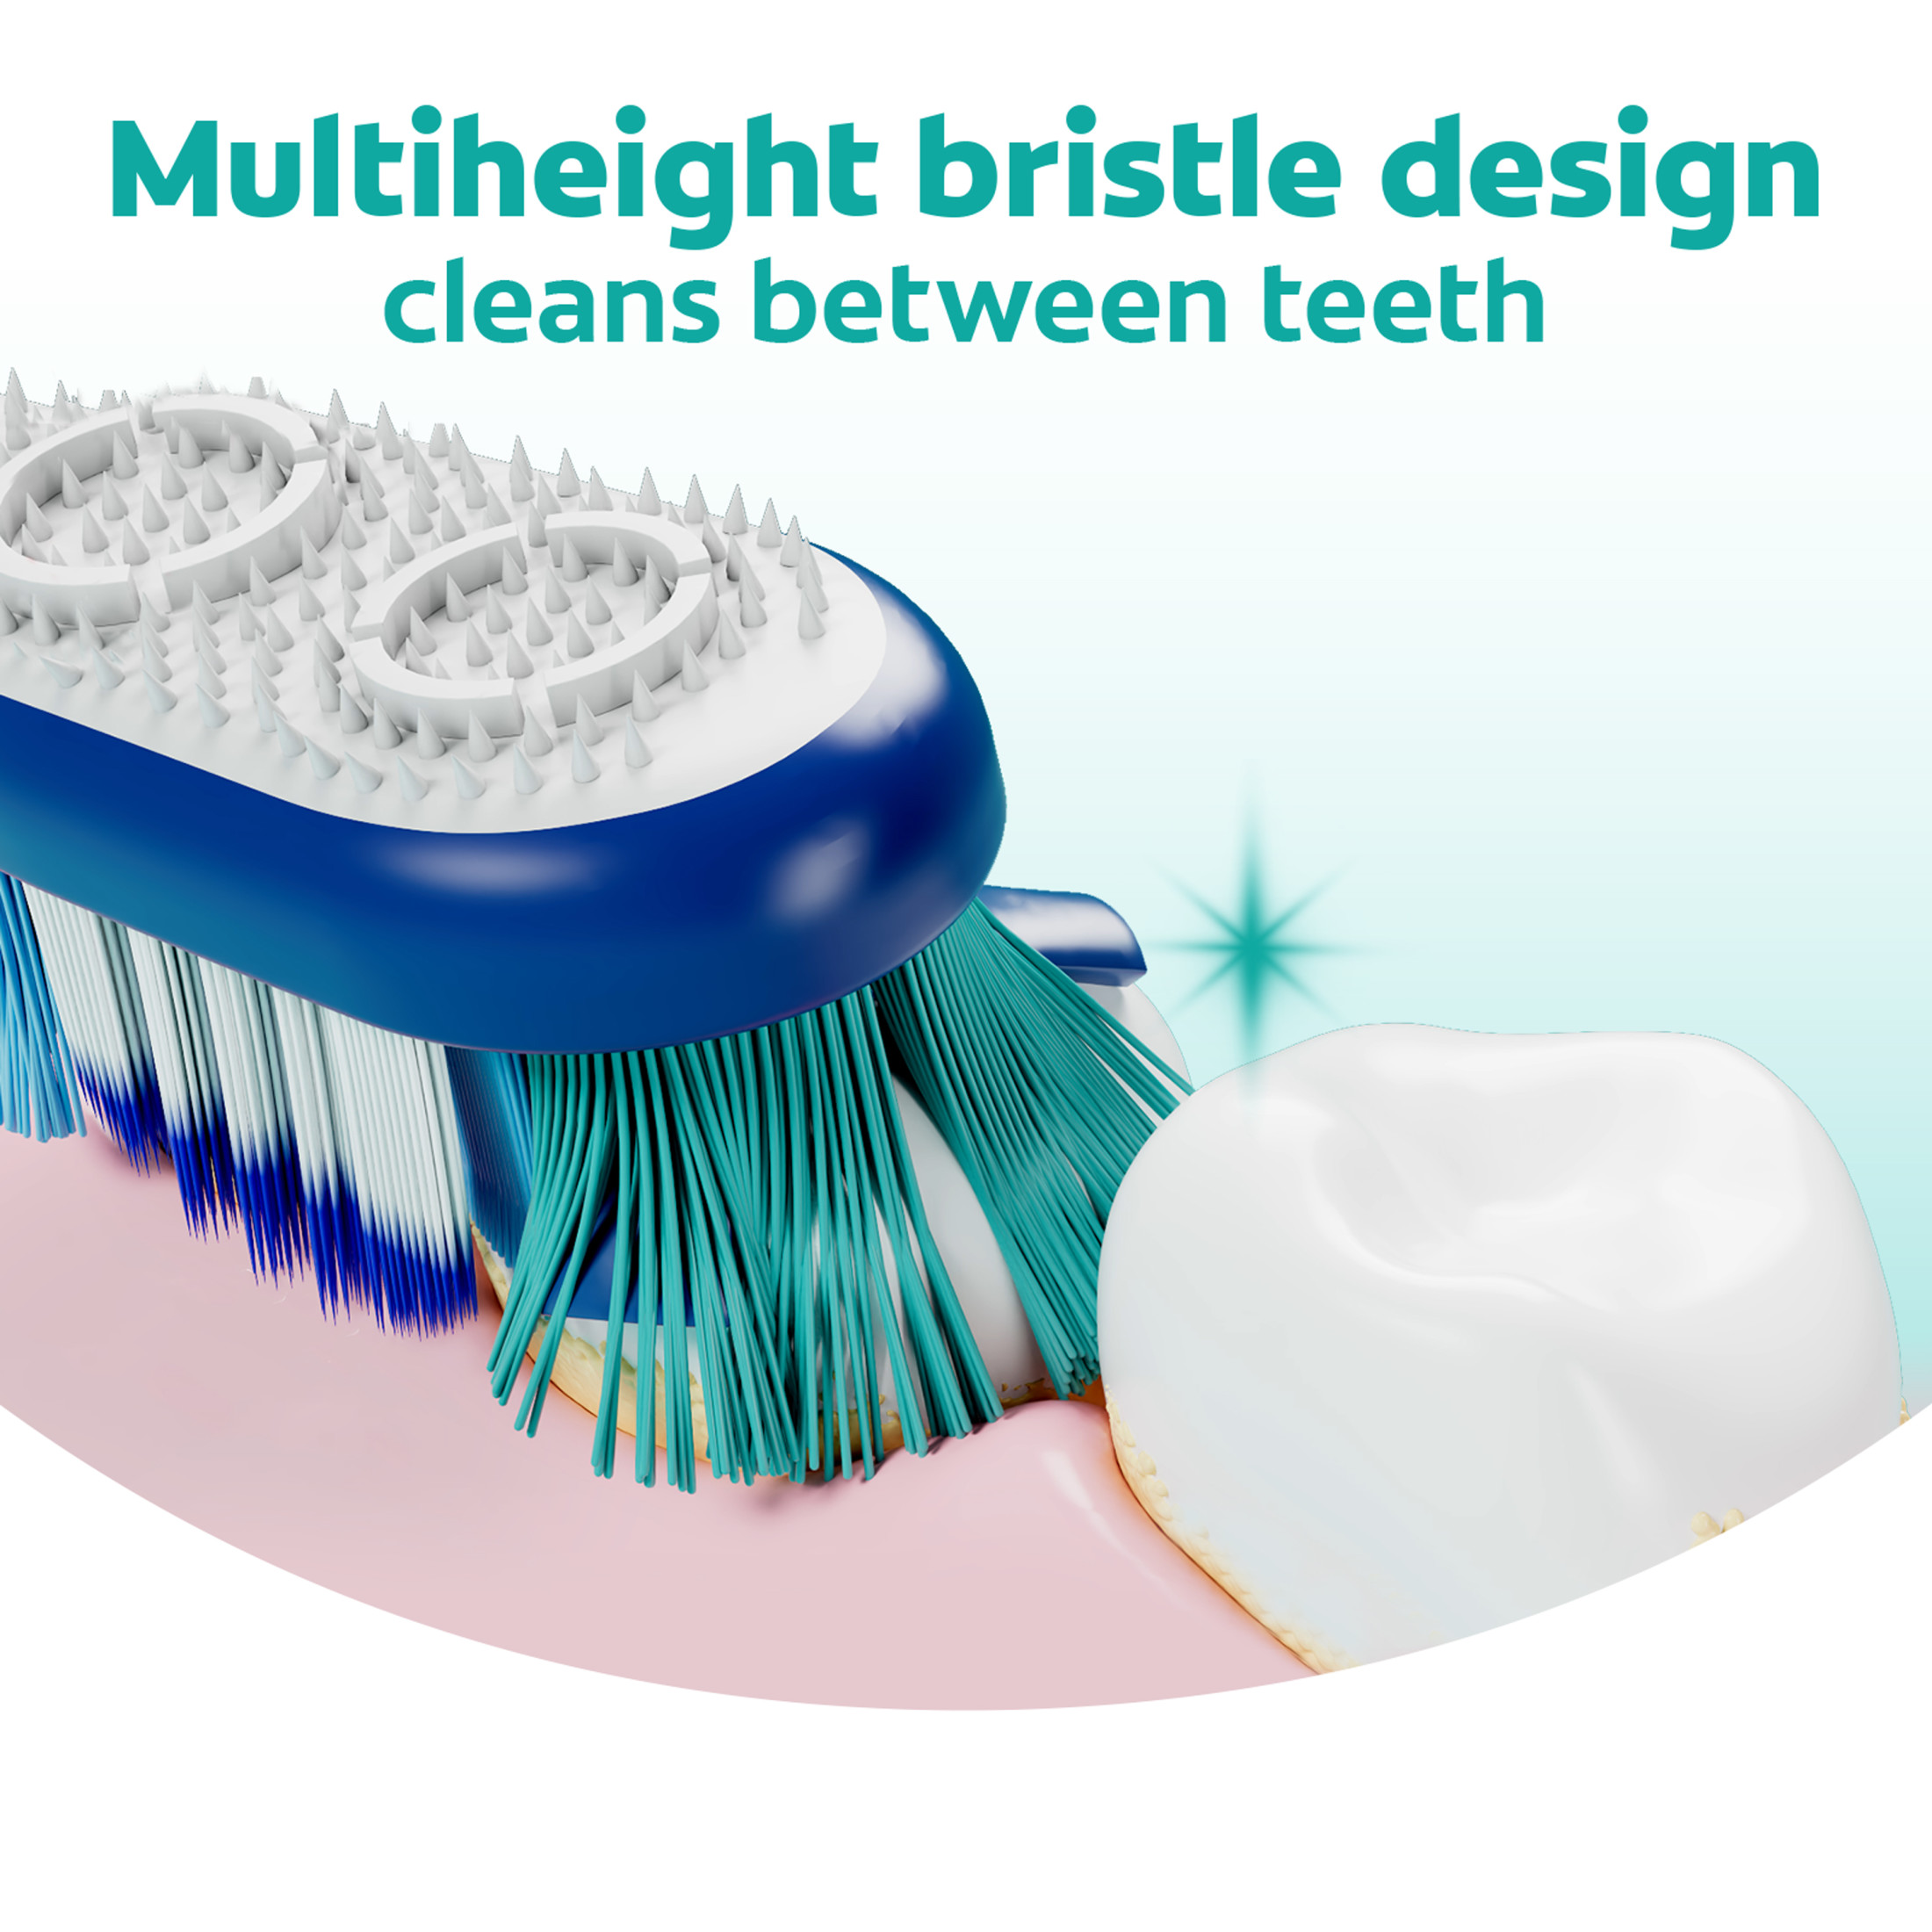 Colgate 360 Whole Mouth Clean Medium Toothbrush, Adult Toothbrush, 4 Pack - image 4 of 14